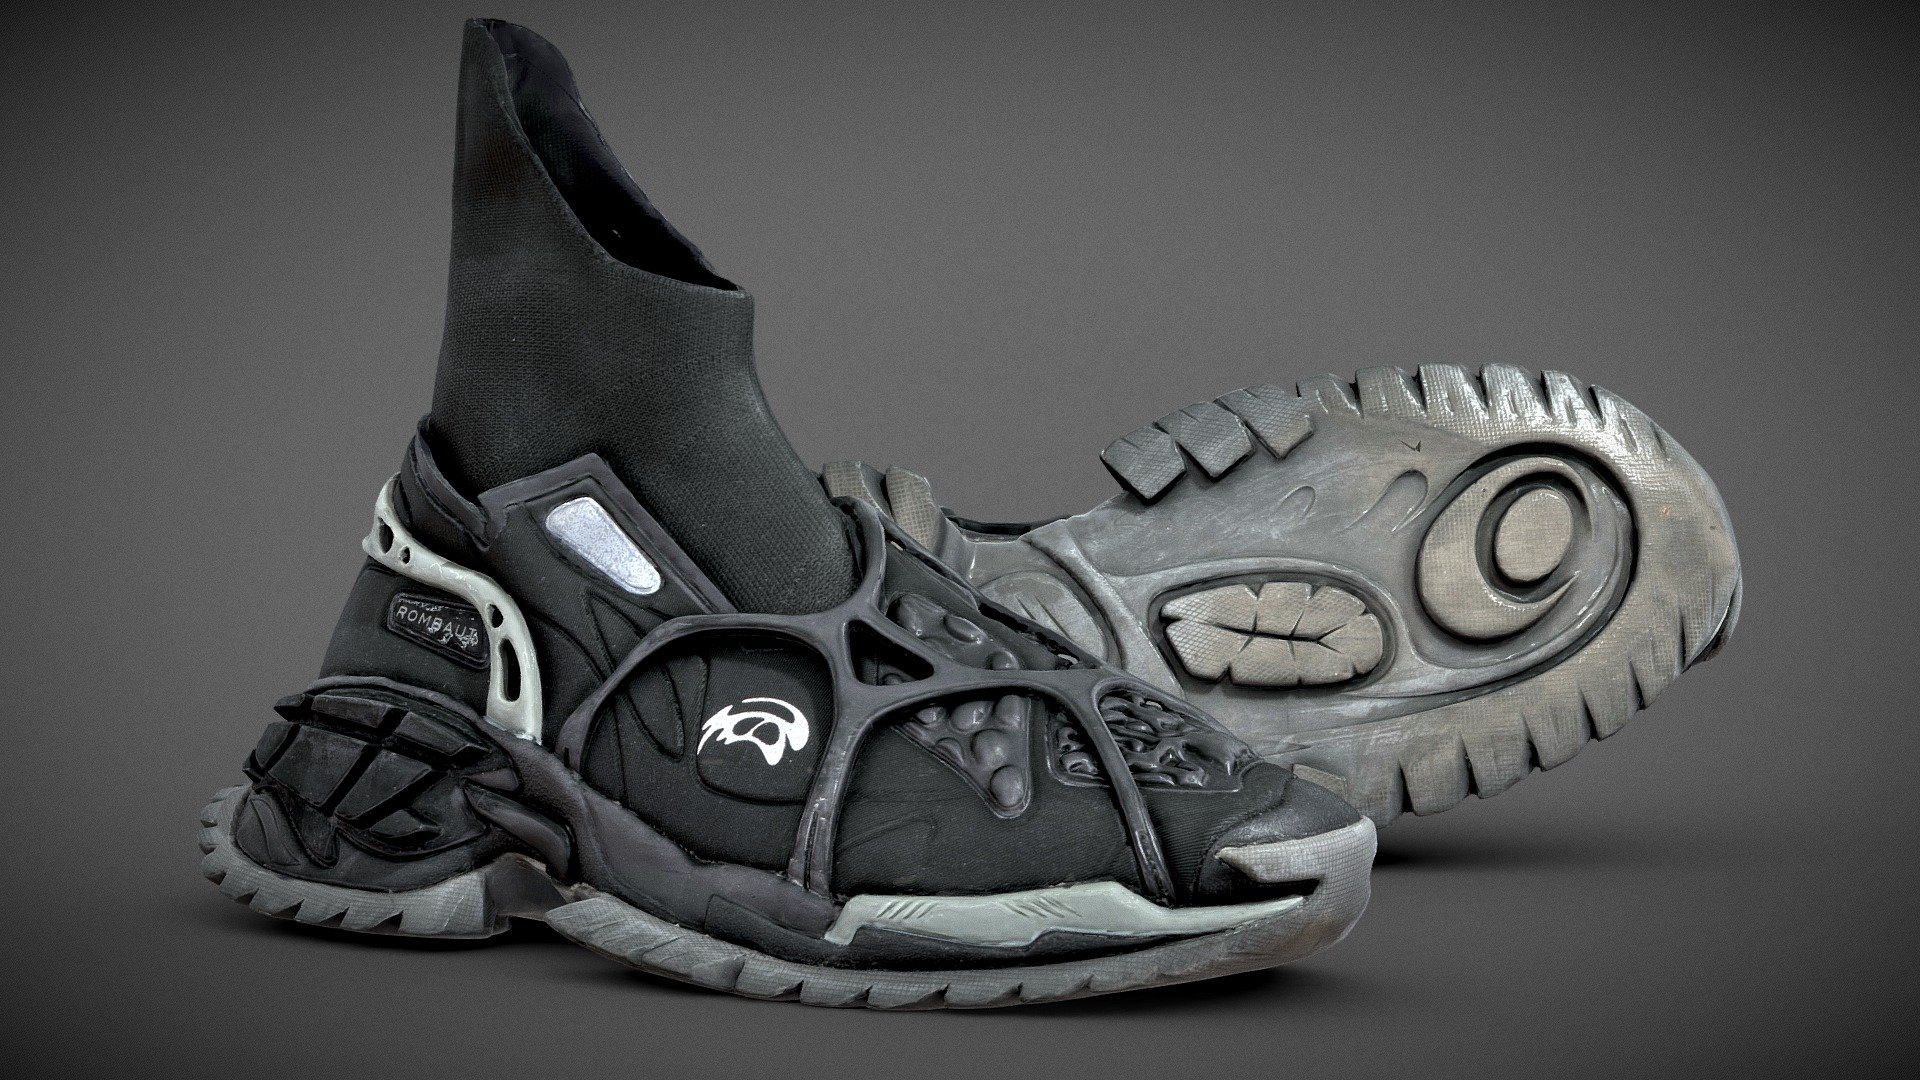 Photogrammetry scan of this shoe ROMBAUT ENZYMA SOCK RUNNER BLACK .
Made with 900 pictures
8K doubles udim textures with PBR treatment 3d model